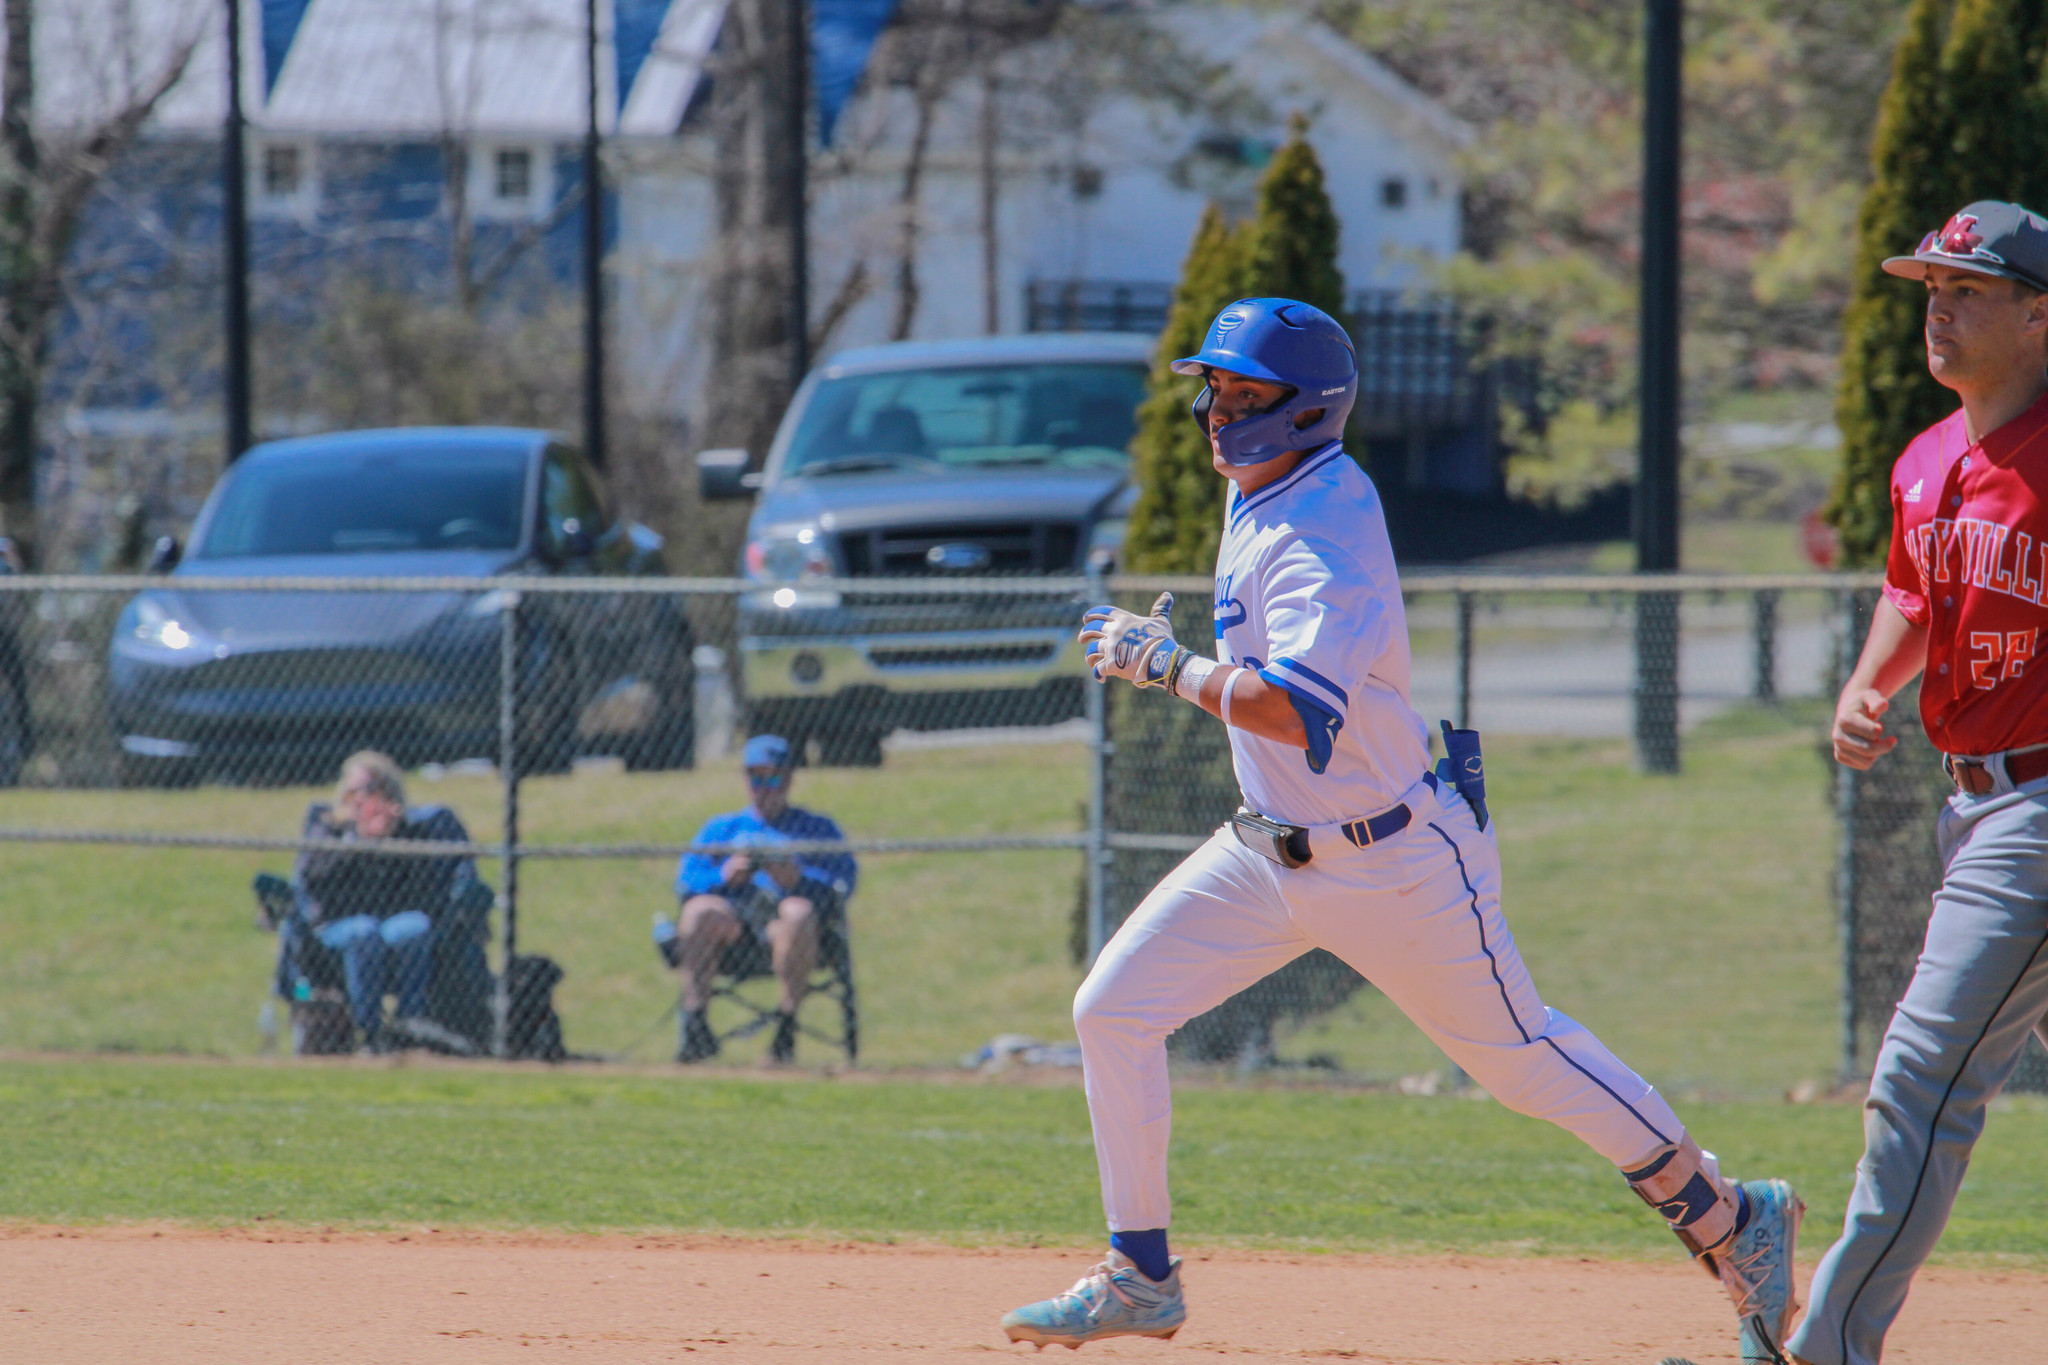 Frankie Vasquez went 3-for-5 with a three-run home run, logging four RBIs and three runs scored (Photo courtesy of Damon Hewitt '23)